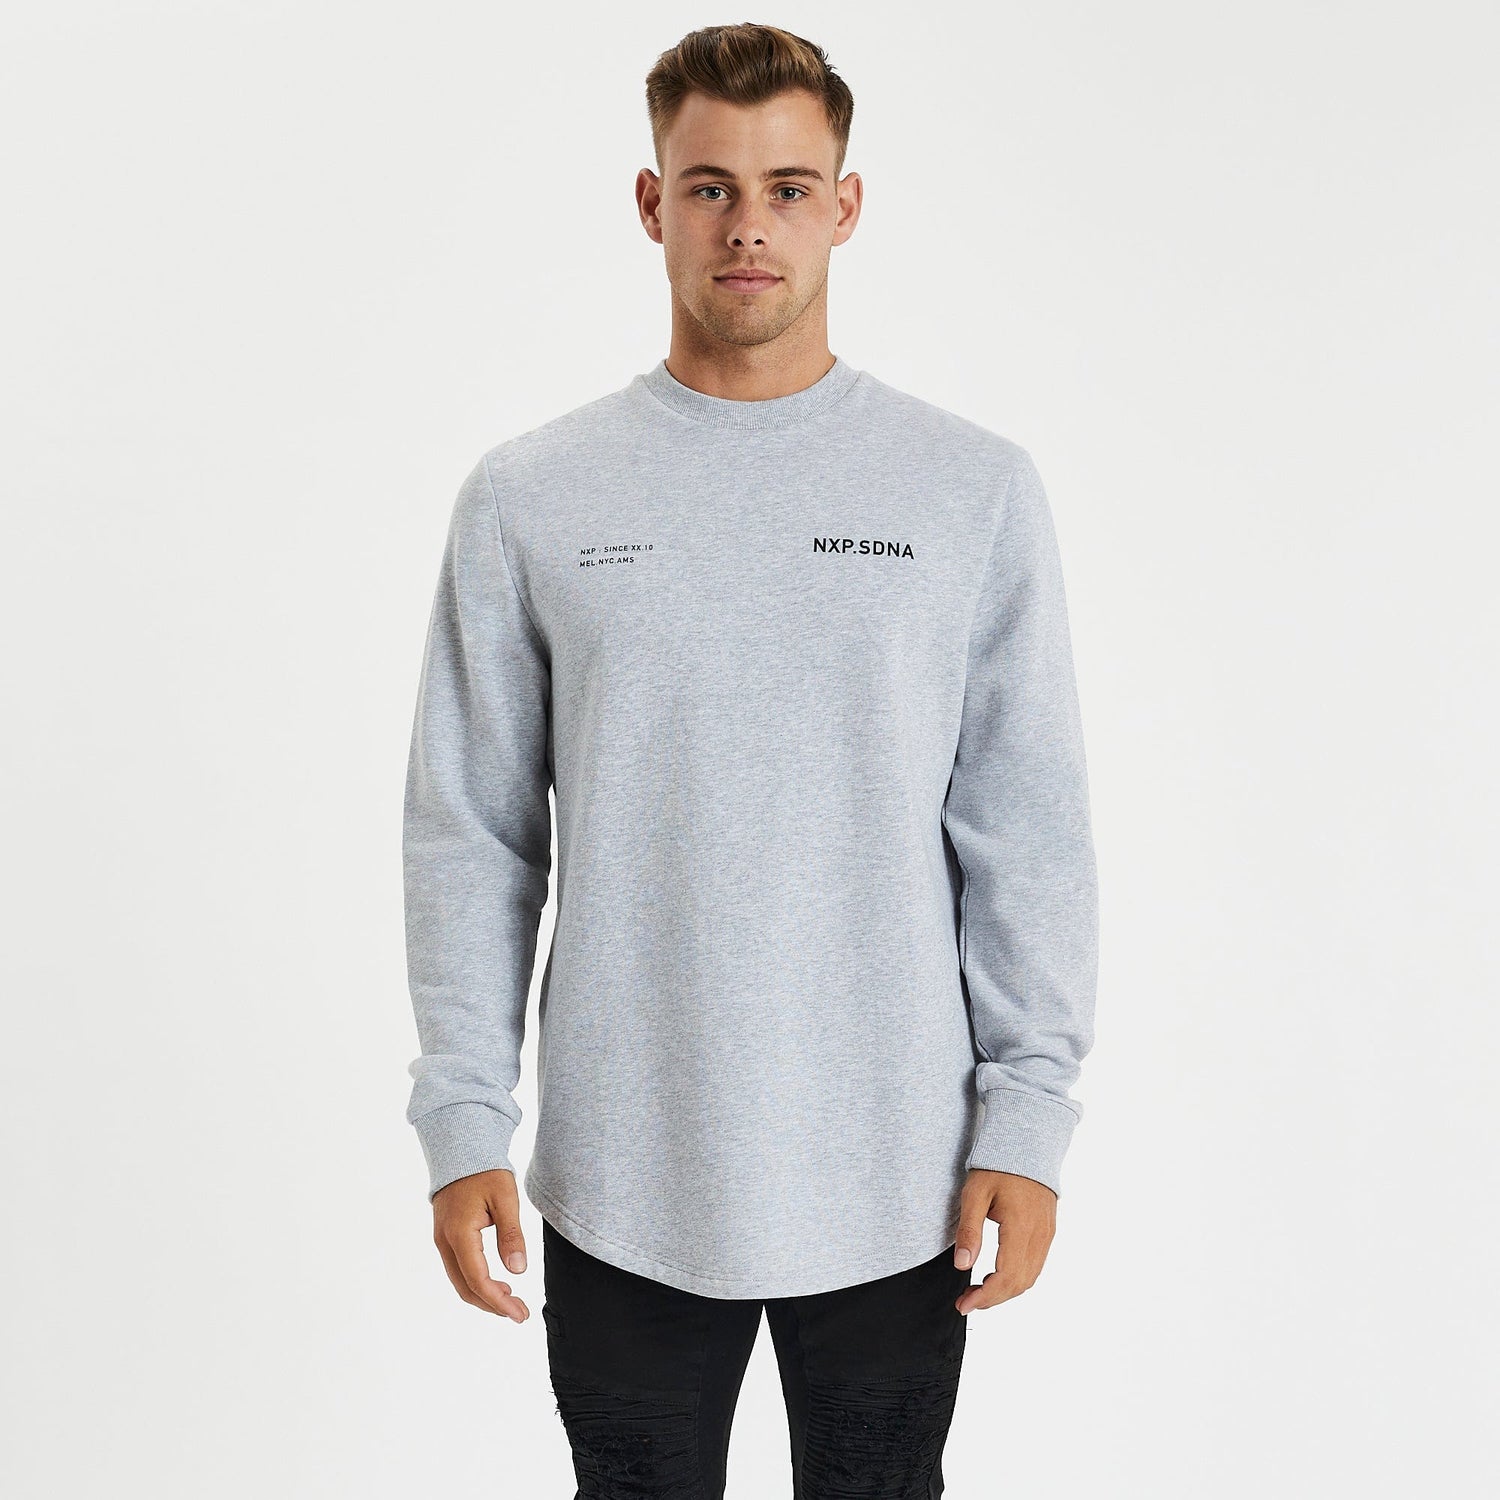 The Storm Dual Curved Jumper Grey Marle